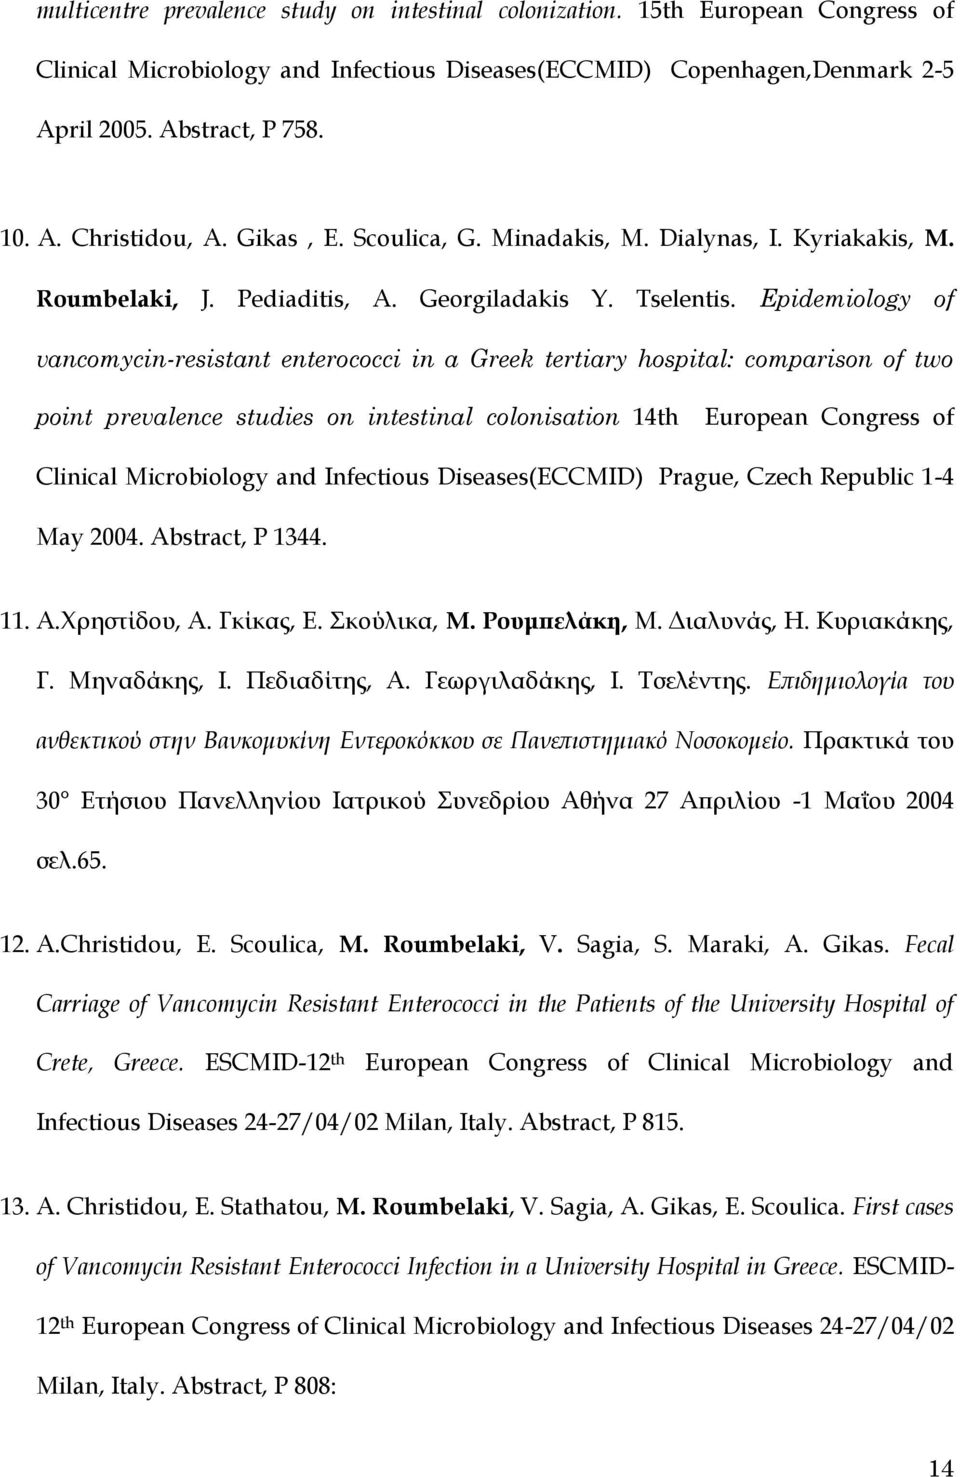 Epidemiology of vancomycin-resistant enterococci in a Greek tertiary hospital: comparison of two point prevalence studies on intestinal colonisation 14th European Congress of Clinical Microbiology